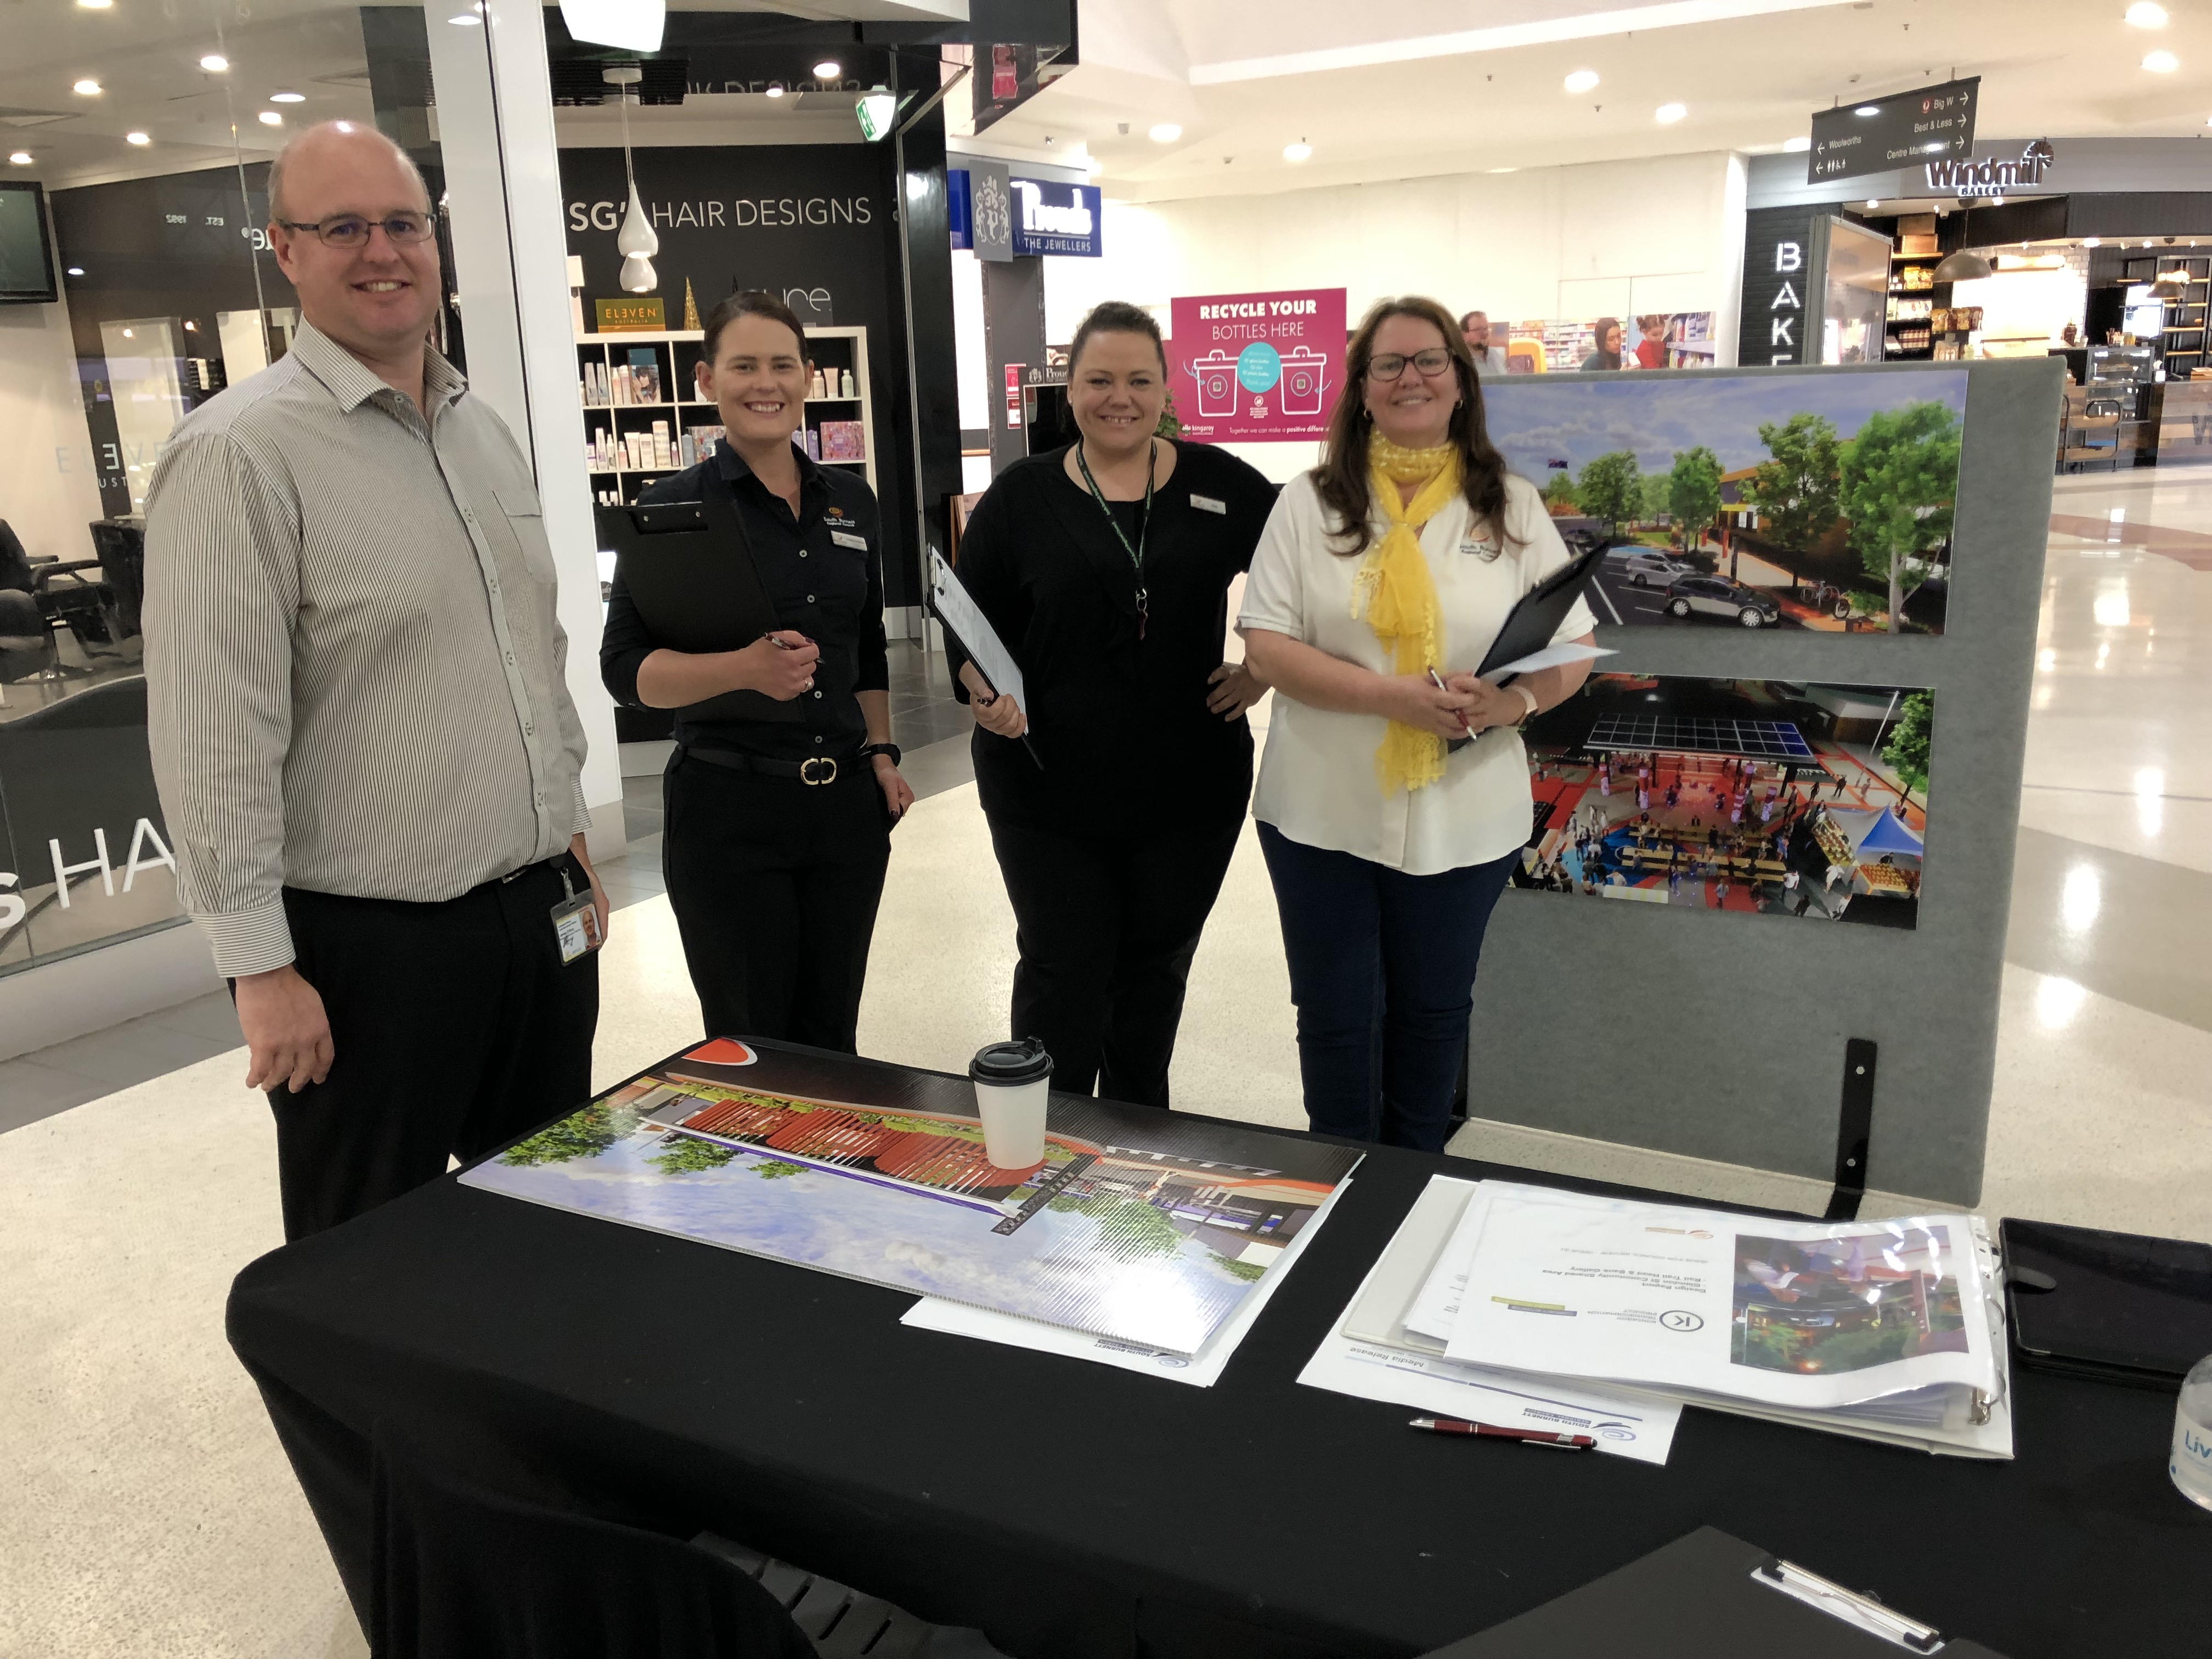 Image: Councillor Kirstie Schumacher, Councillor Danita Potter and the KTP team are ready to take your feedback on the KTP shared zones designs